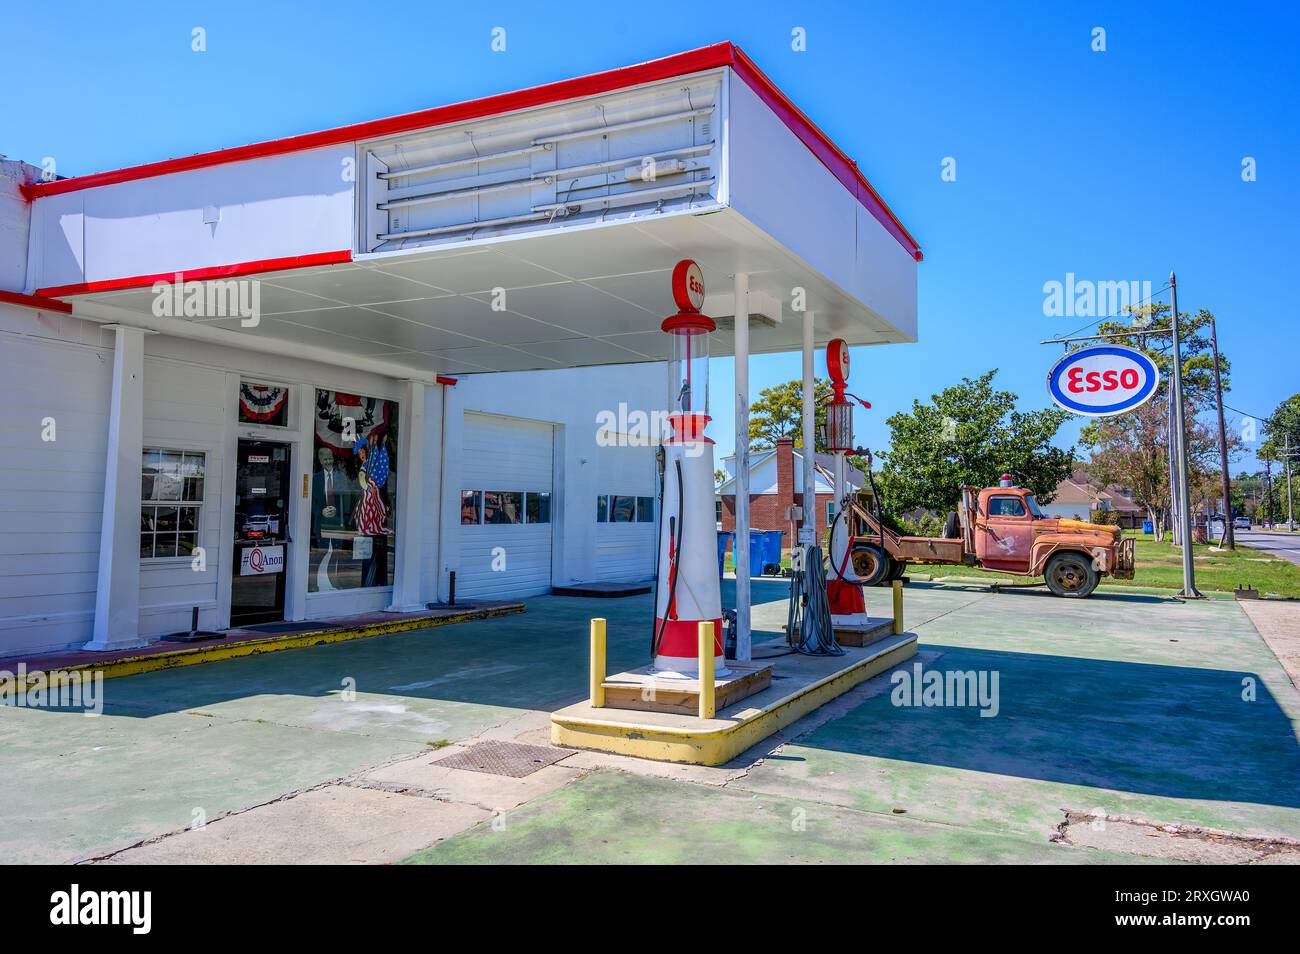 NEW ROADS, LA, USA - SEPTEMBER 19, 2023: Retro Esso gas station displaying right wing political signs, antique pumps, and a rusted vintage tow truck Stock Photo